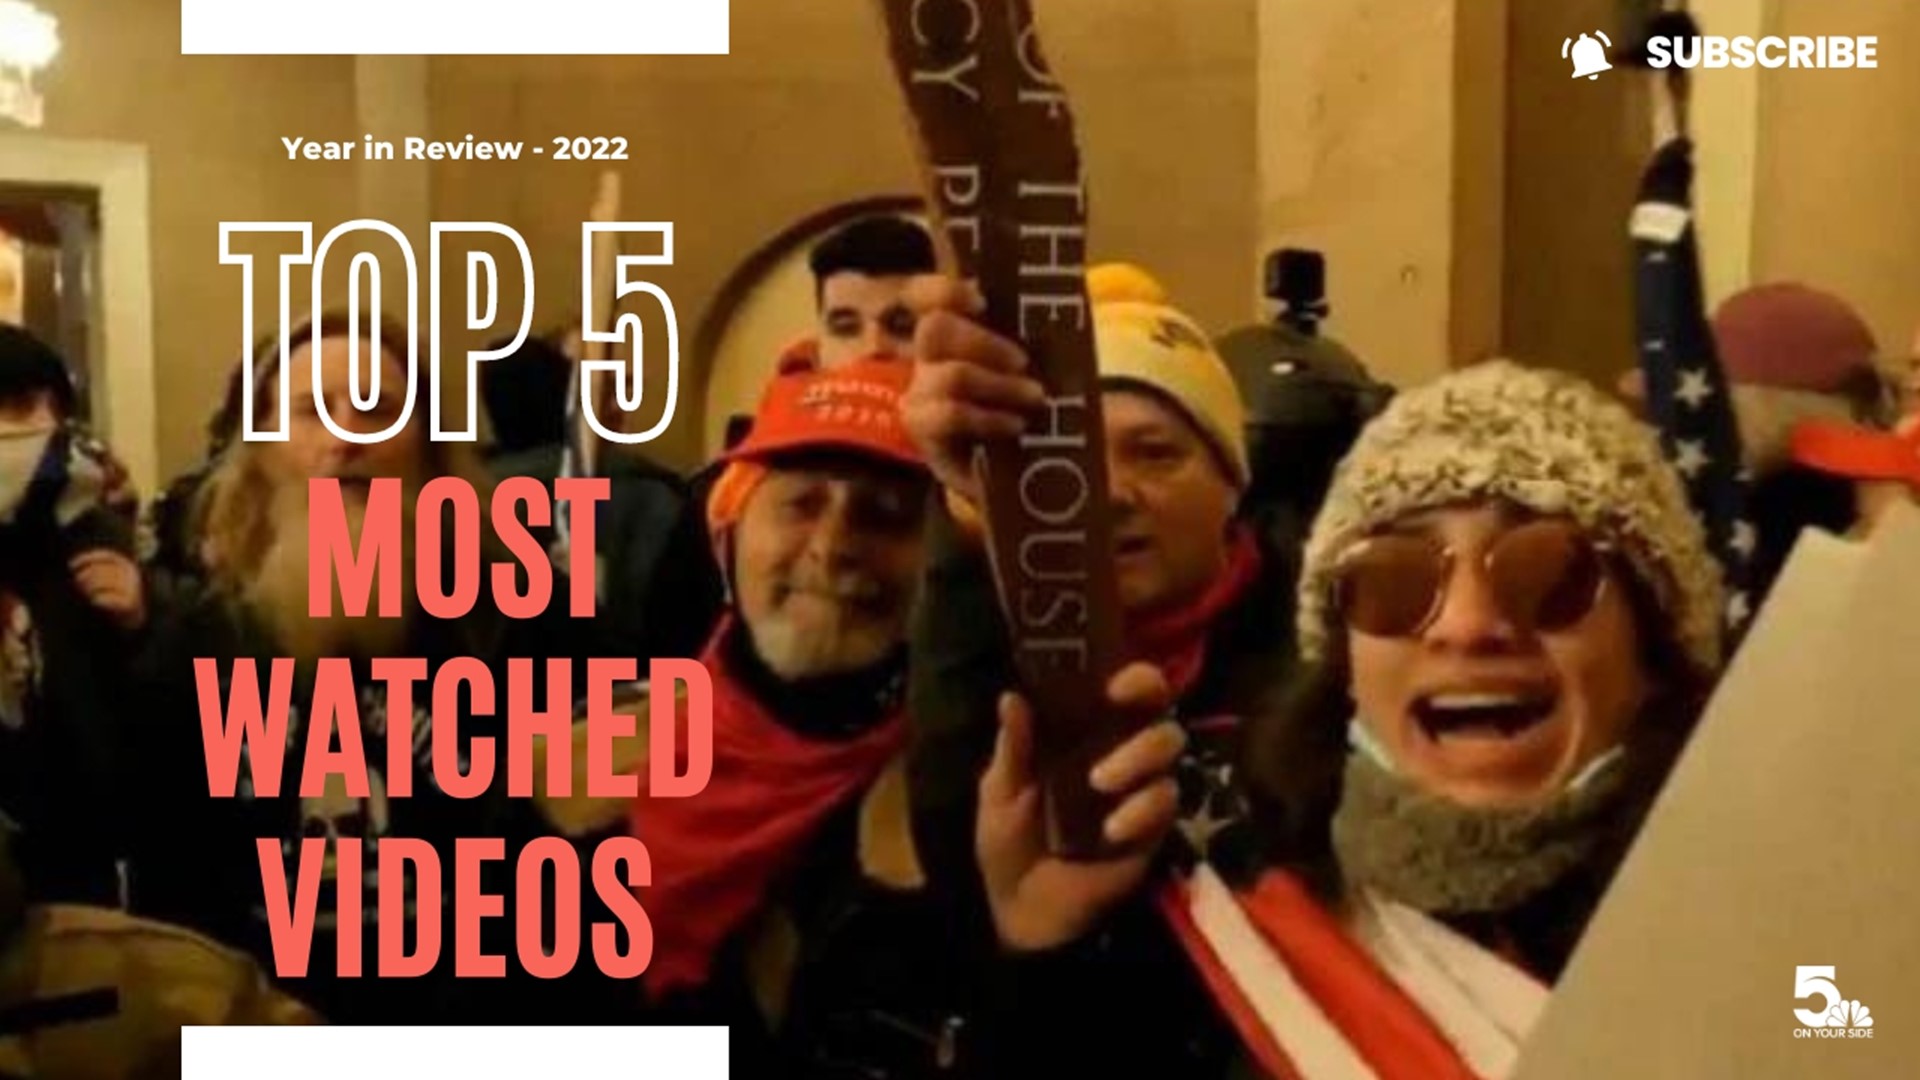 Before we say Adiós” to 2022, let's rewind back to some of our most-watched YouTube. Can you guess which made the list?